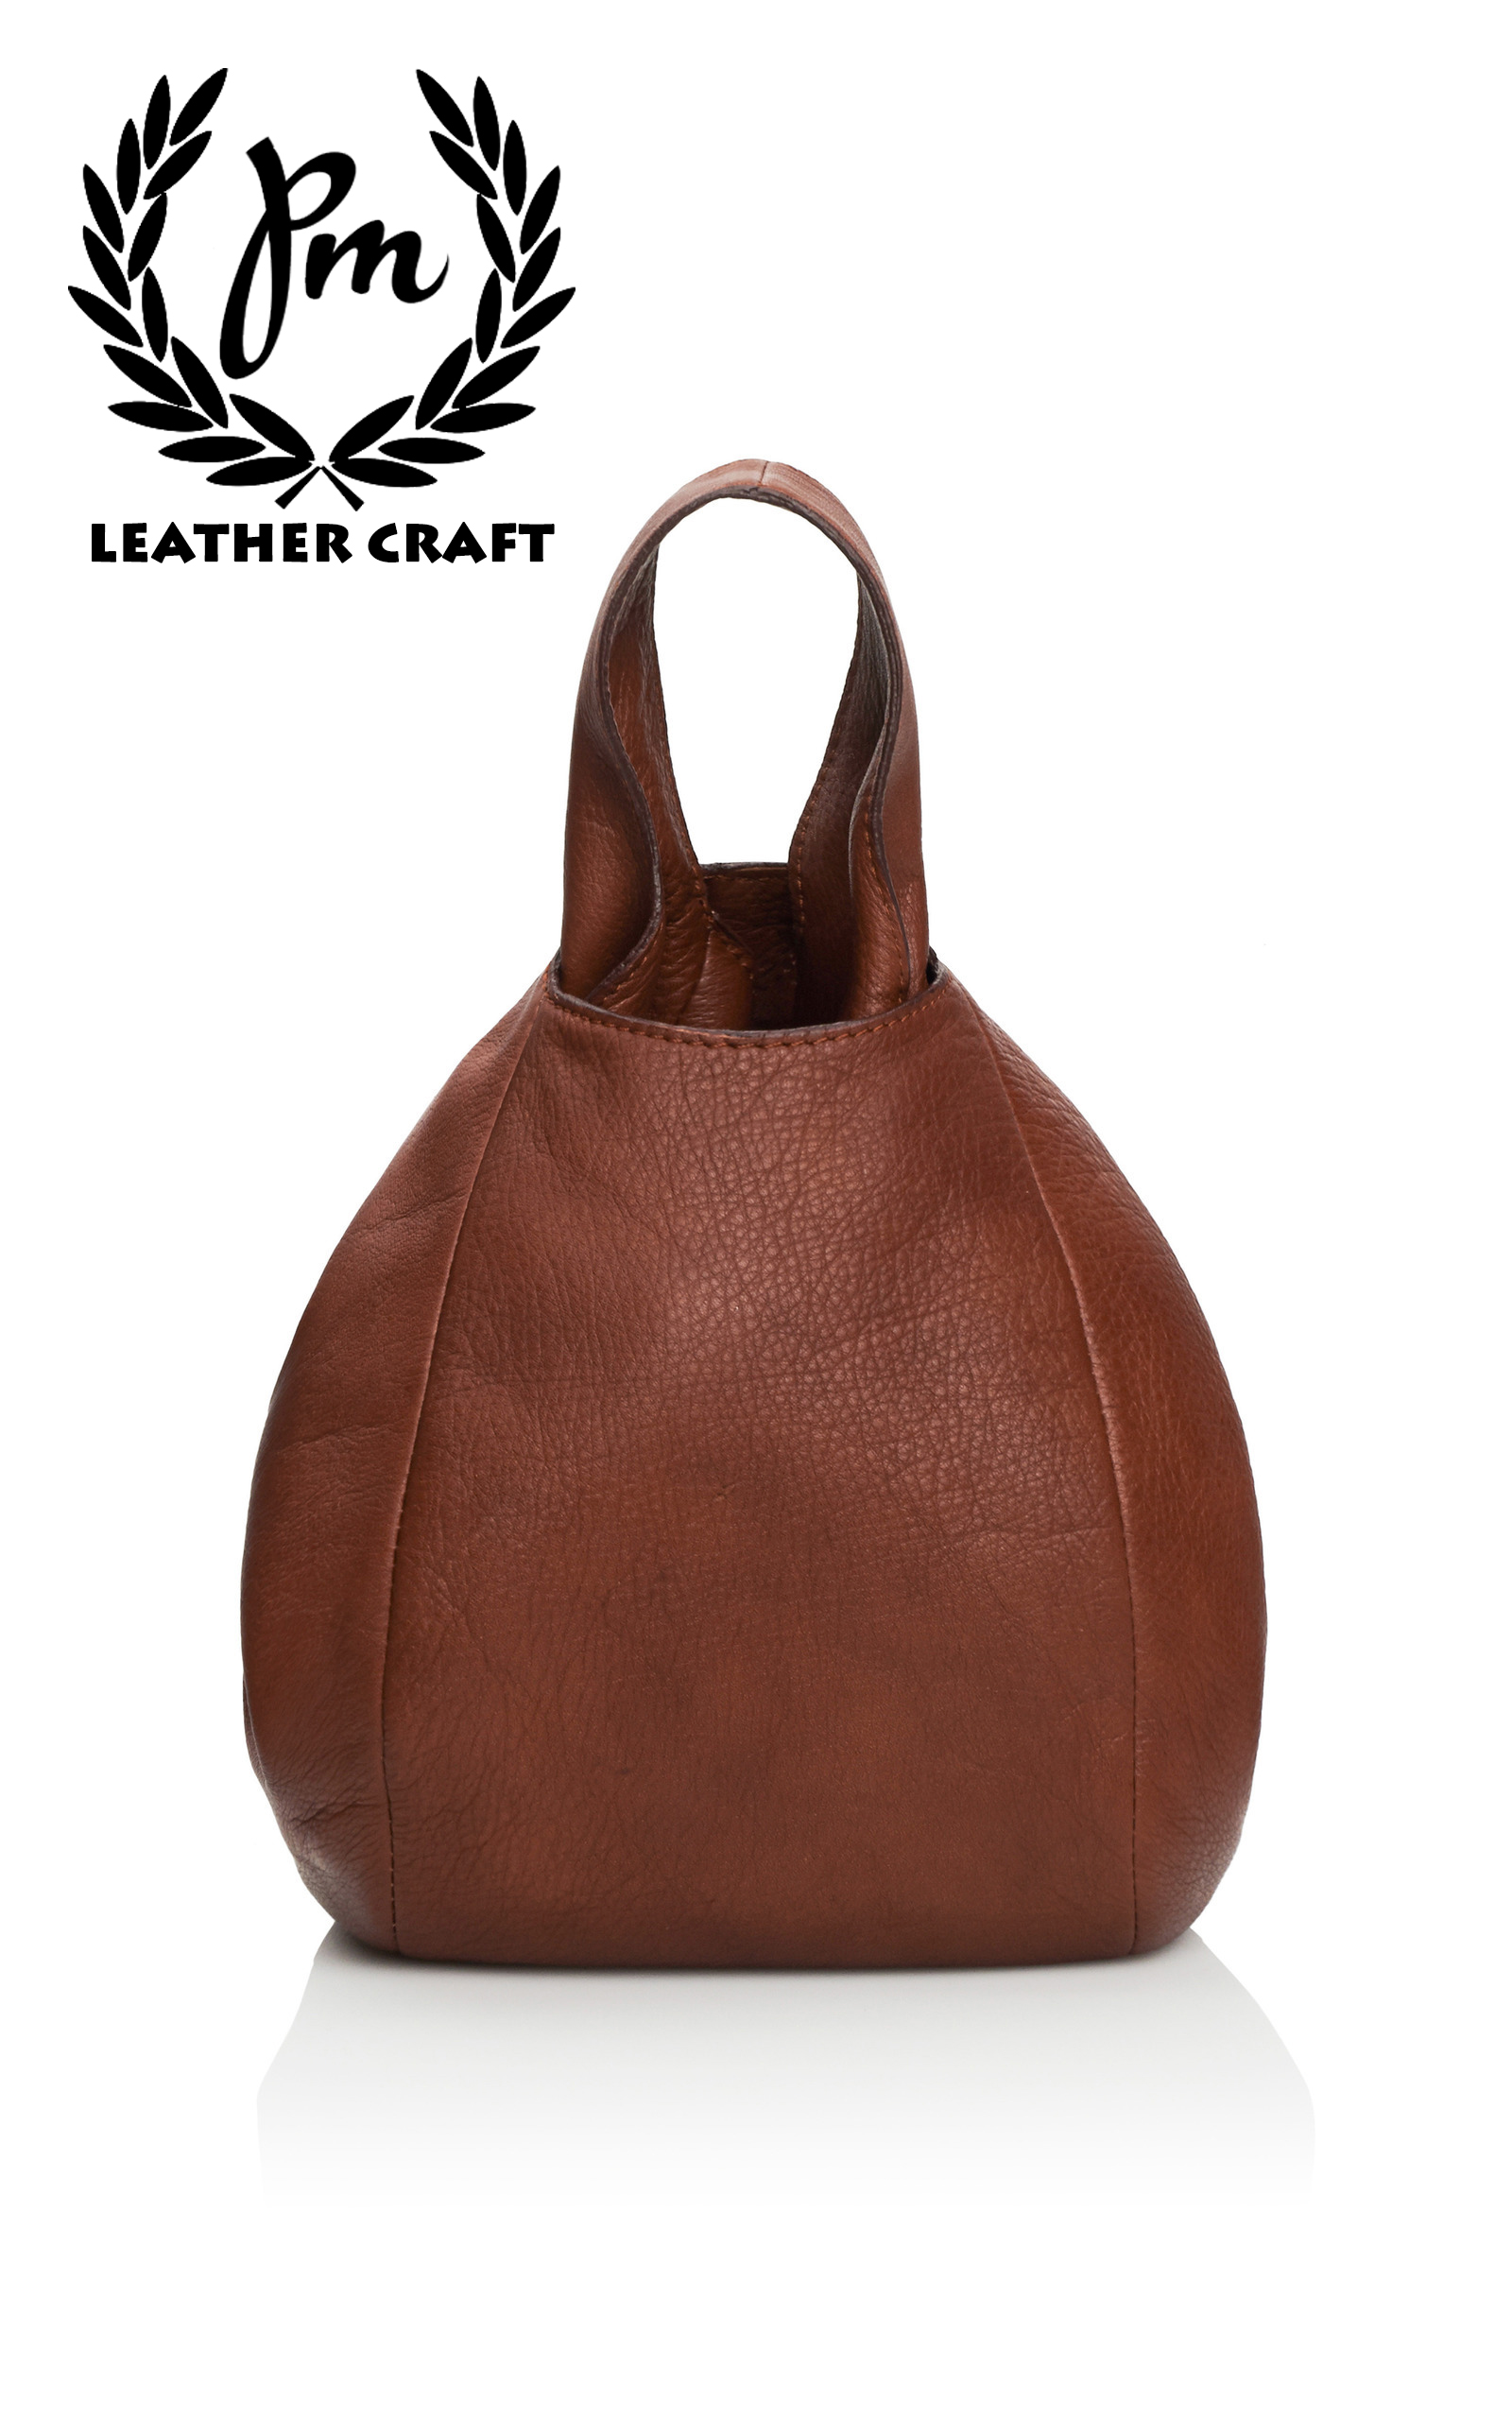 PM LEATHER CRAFT, Leather Hip Fanny Packs In Chennai,Leather I Pad Folders In Chennai,Leather Key Rings In Chennai,Leather Ladies Bags In Chennai,Leather Laptop Bags In Chennai,Leather Luggage Bags In Chennai
